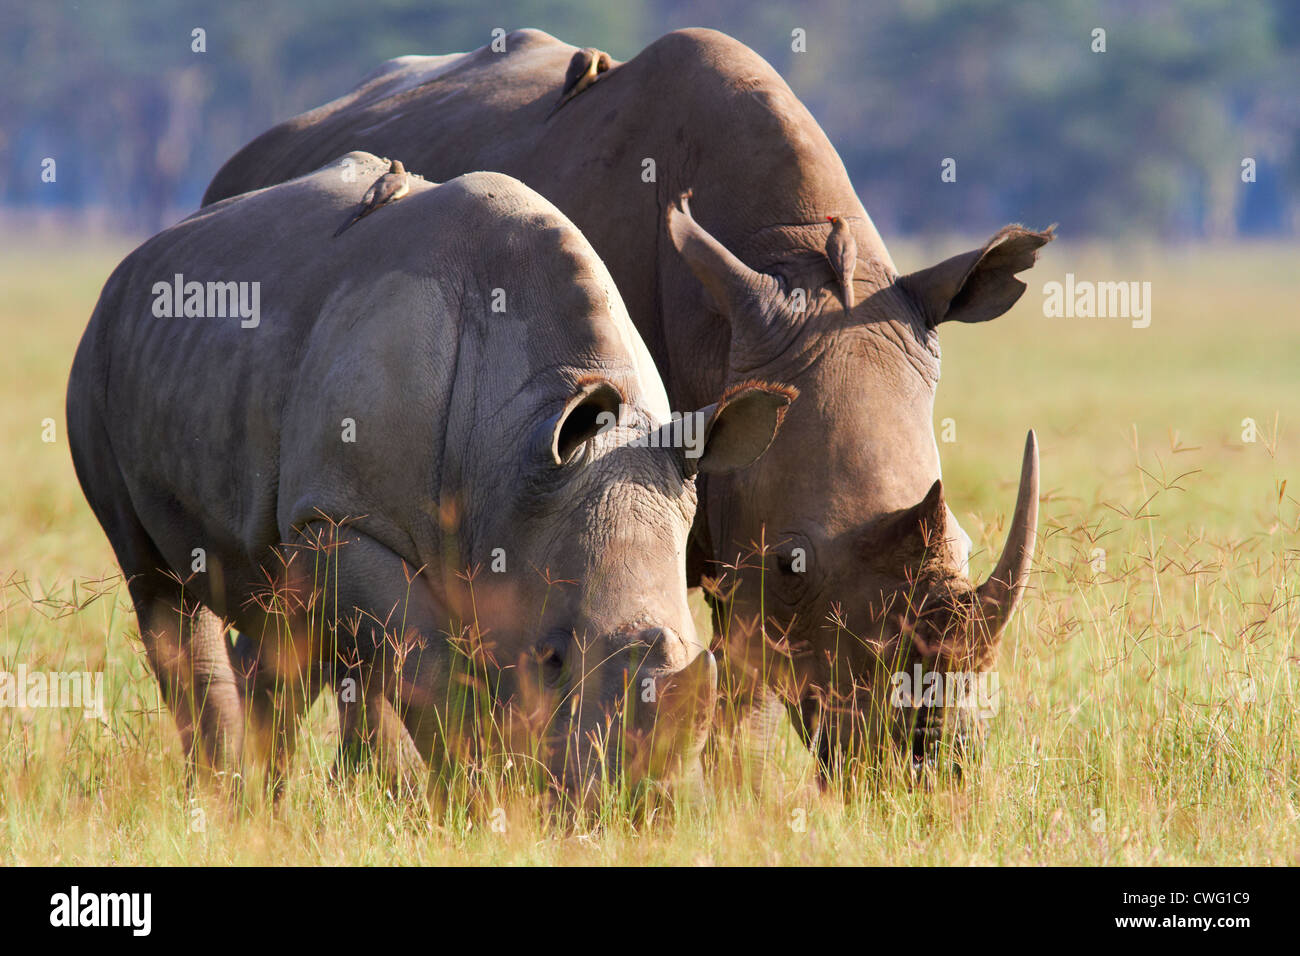 White rhinoceroses with oxpeckers perched on their backs Stock Photo